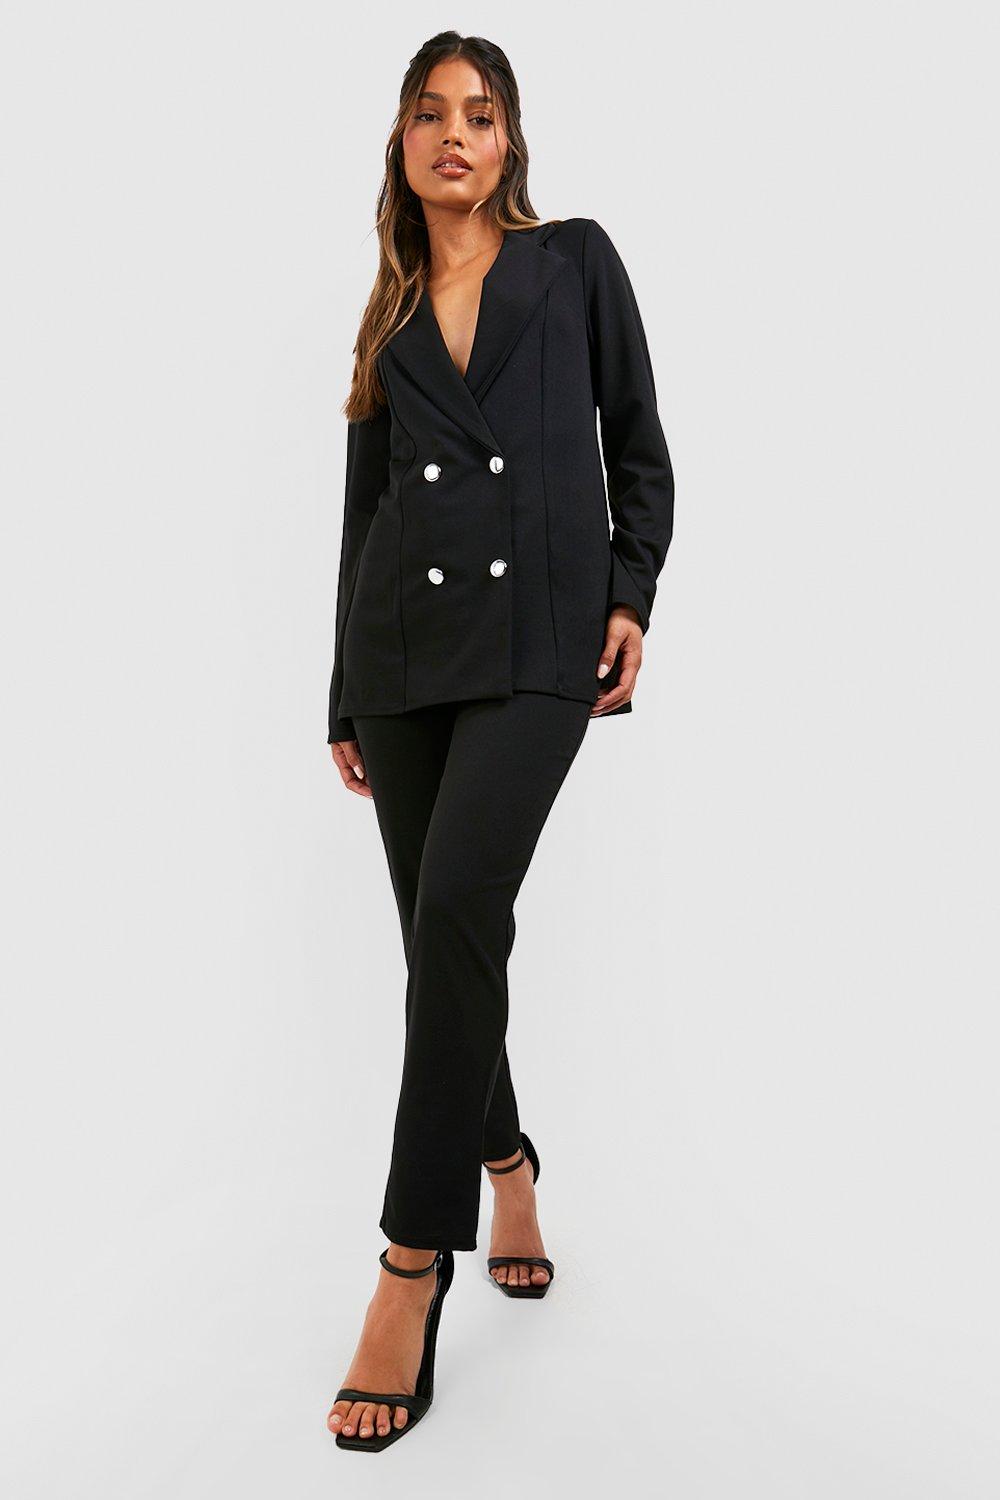 boohoo Women's Jersey Double Breasted Blazer And Trouser Suit Set|Size: 14|black